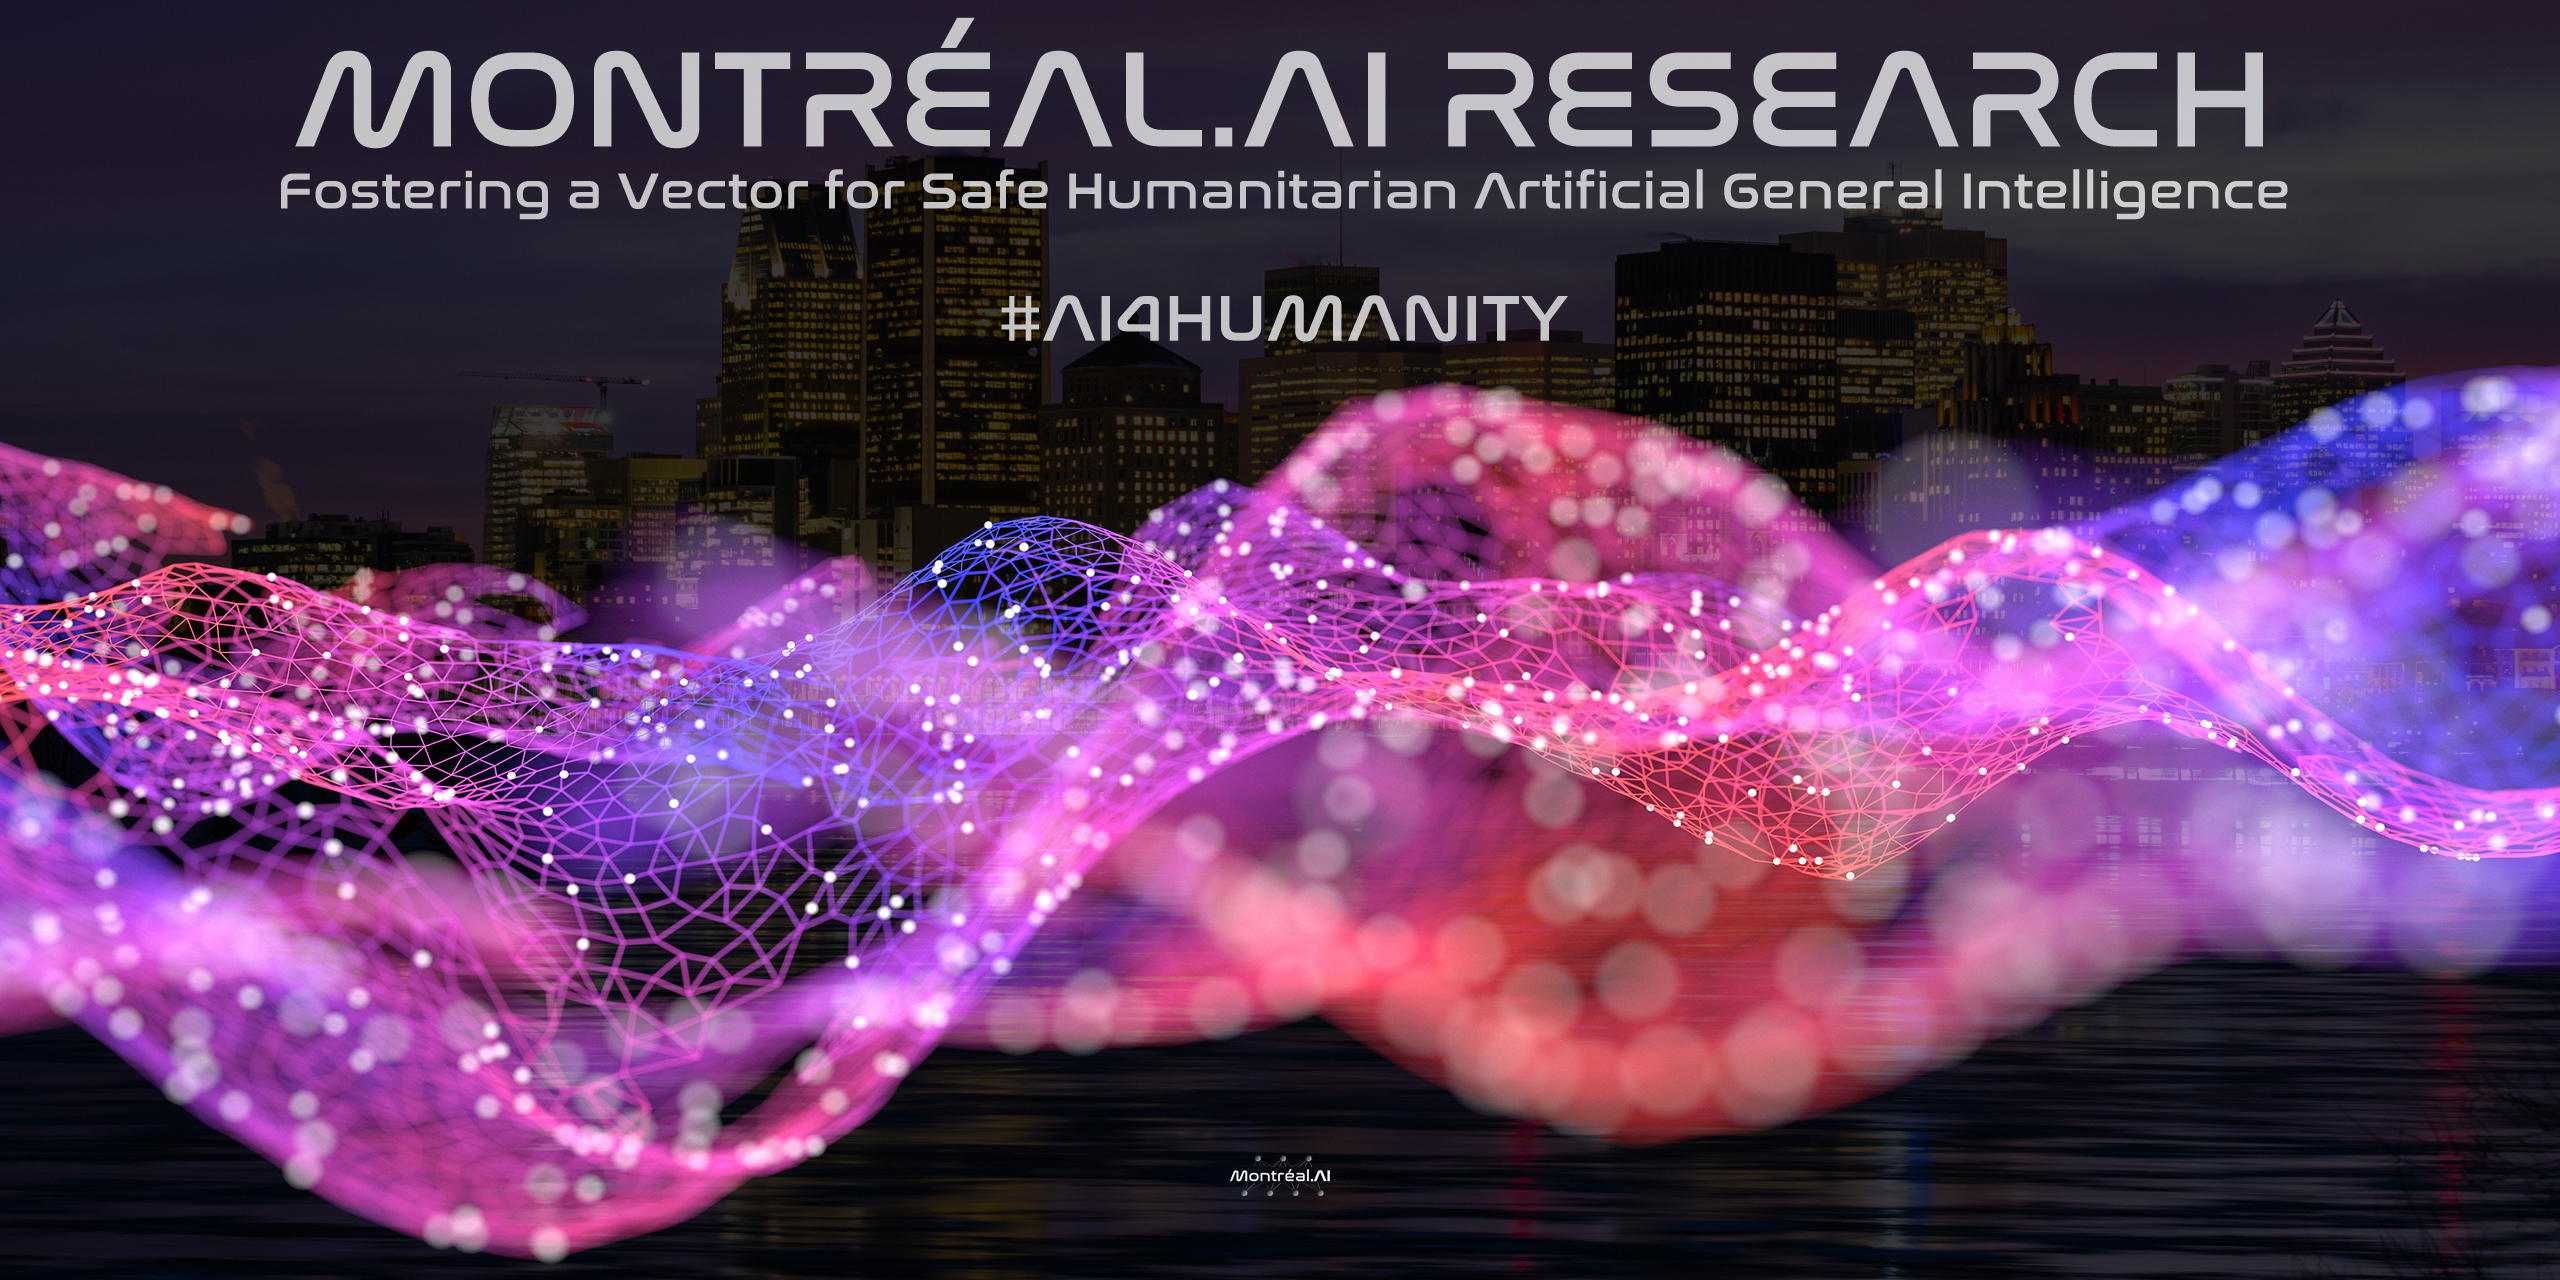 MONTRÉAL.AI Research: Solving The Grand Challenge for AI Research